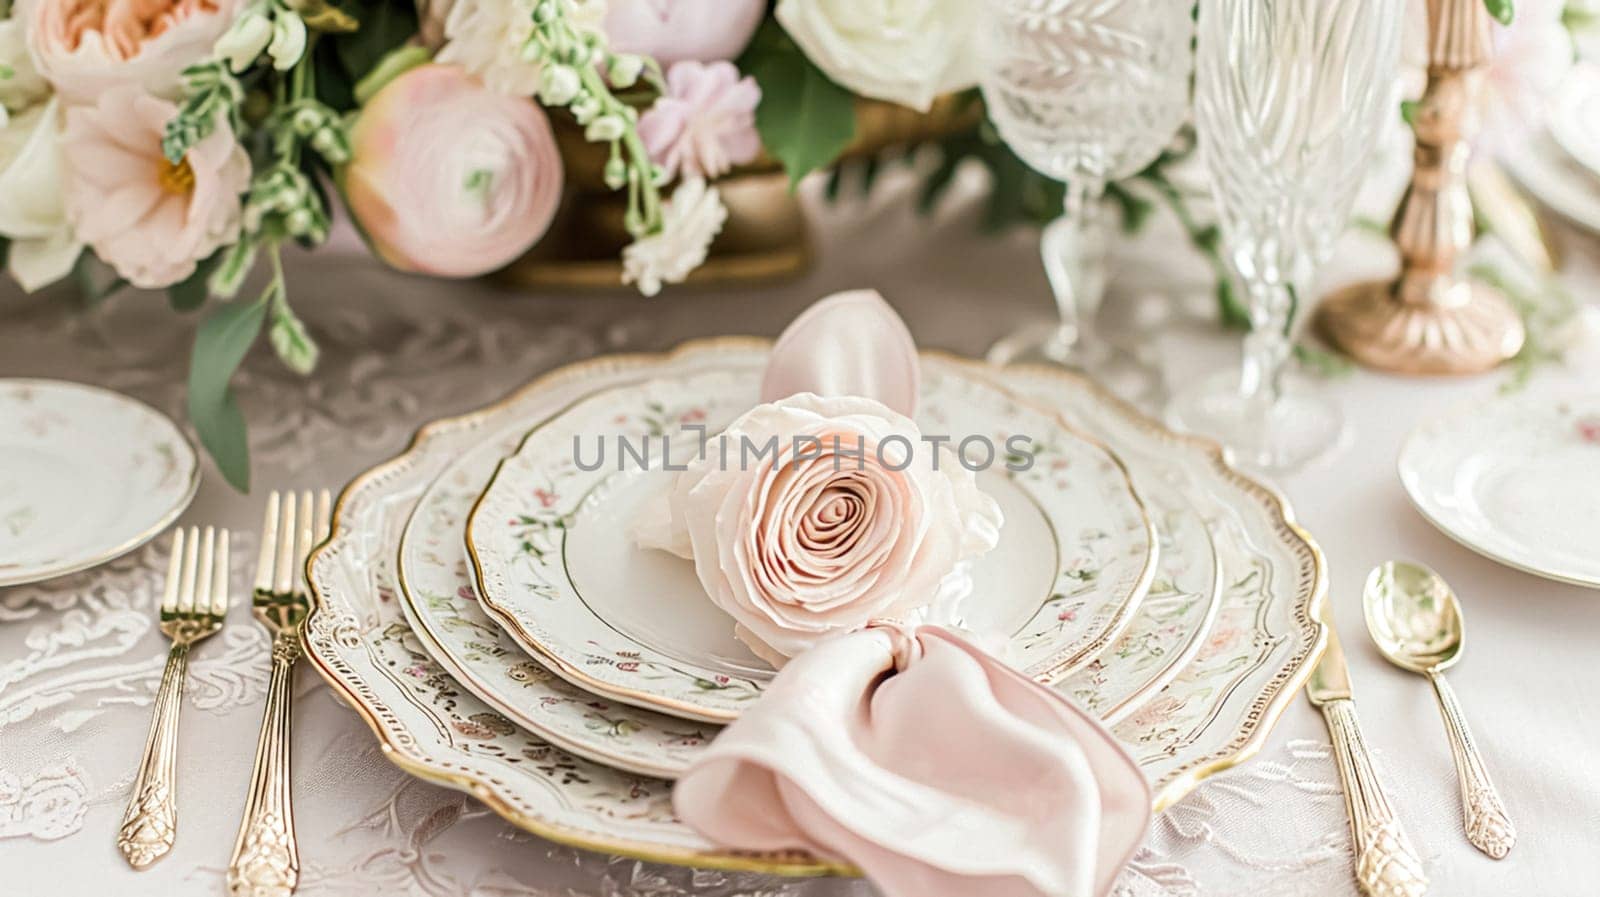 Delightful afternoon tea spread featuring a tiered cake stand brimming with cupcakes, scones, and sweet pastries, accompanied by a floral porcelain tea set